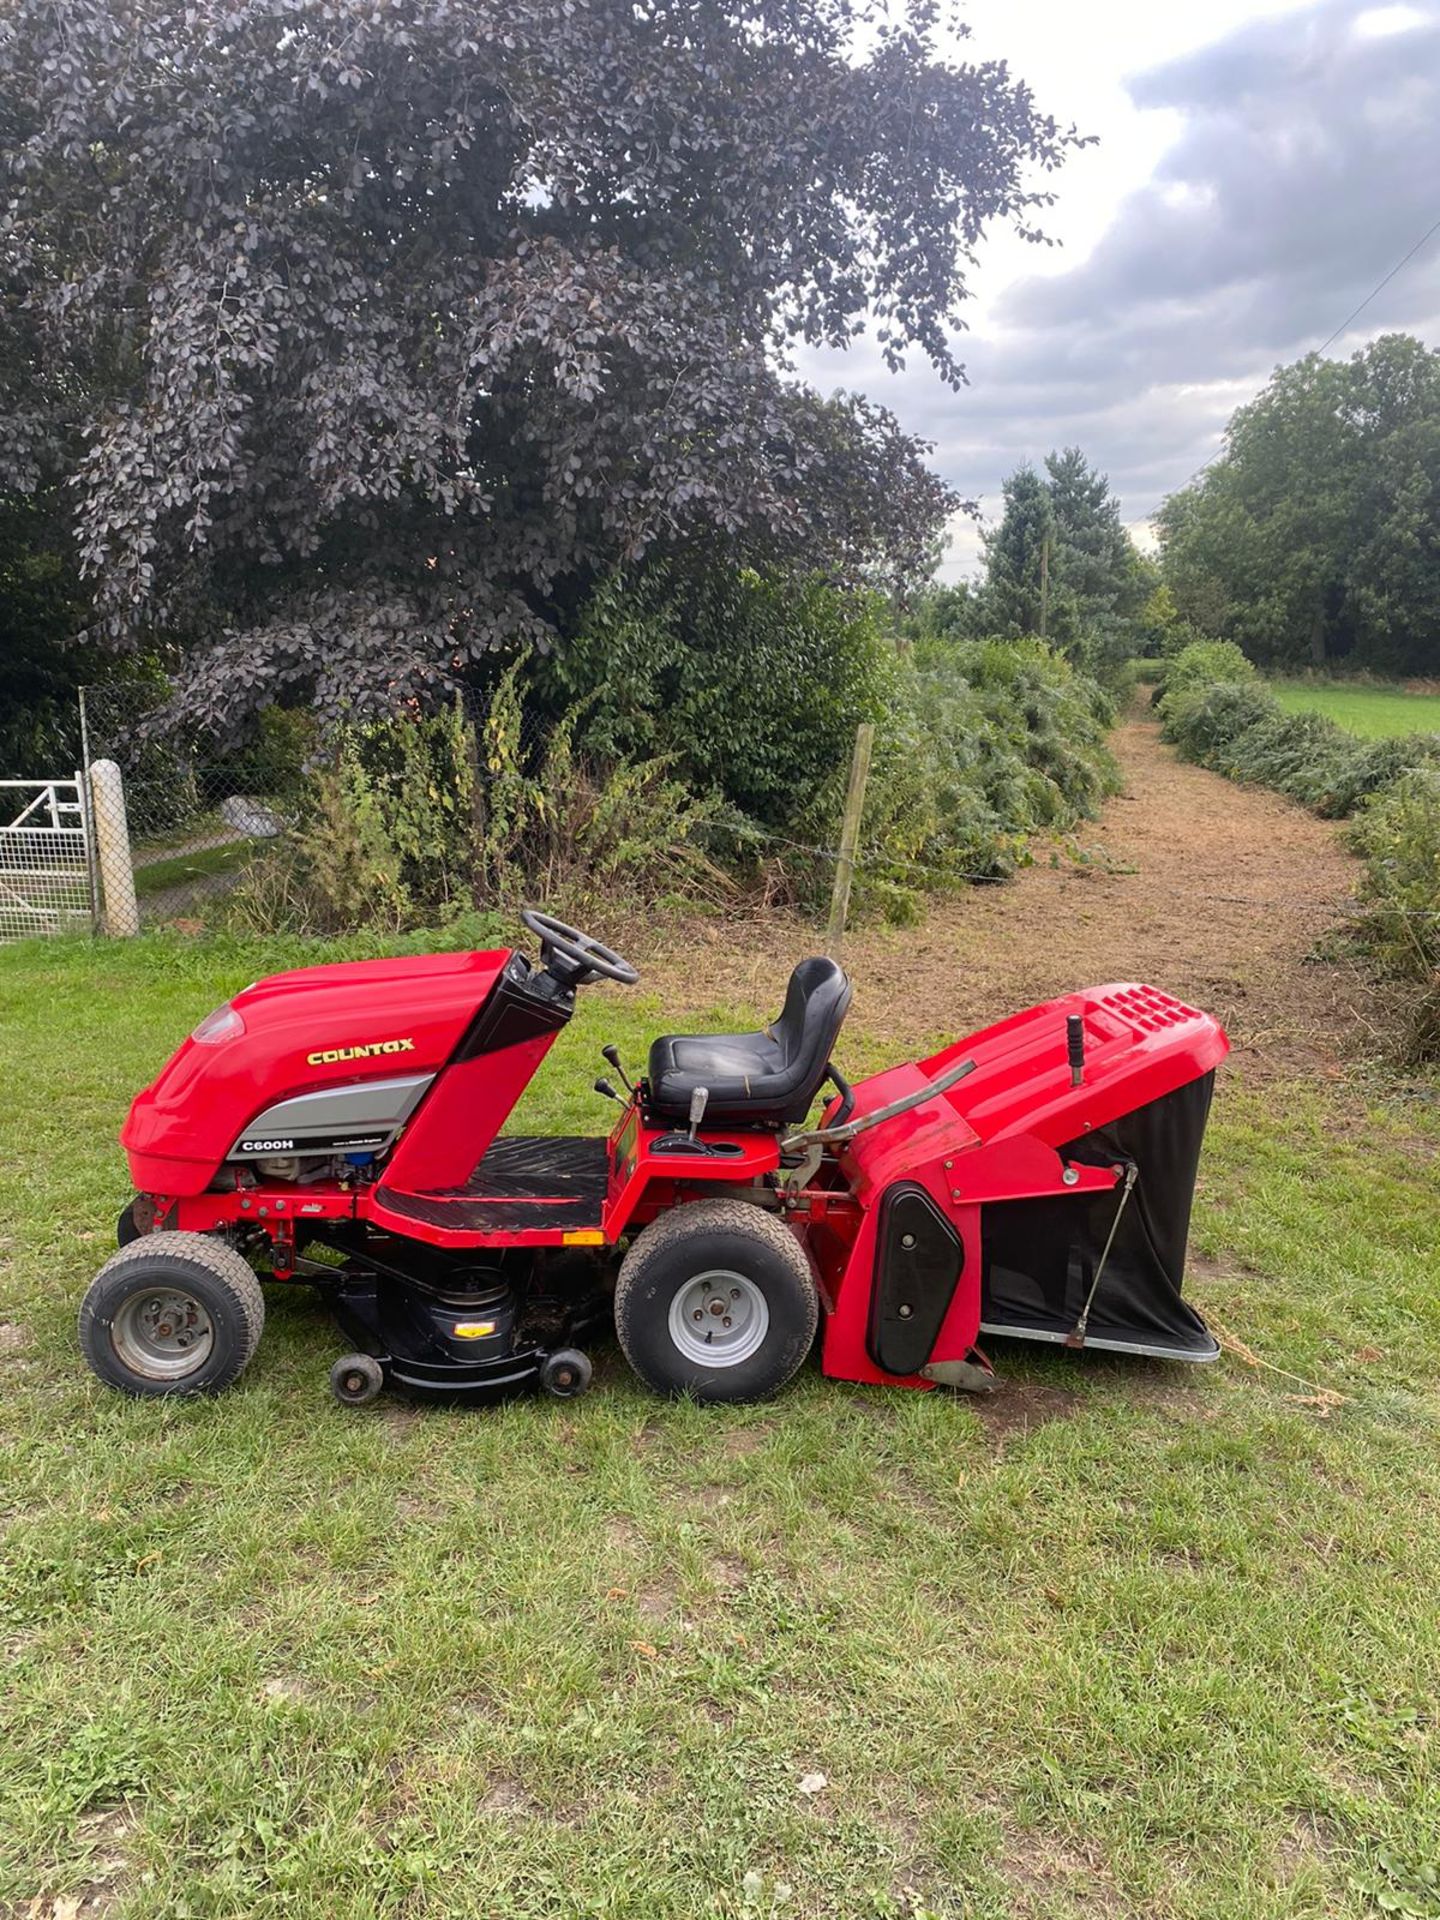 COUNTAX C600H 4 WHEEL DRIVE RIDE ON LAWN MOWER, RUNS DRIVES CUTS AND COLLECTS *NO VAT* - Image 4 of 11